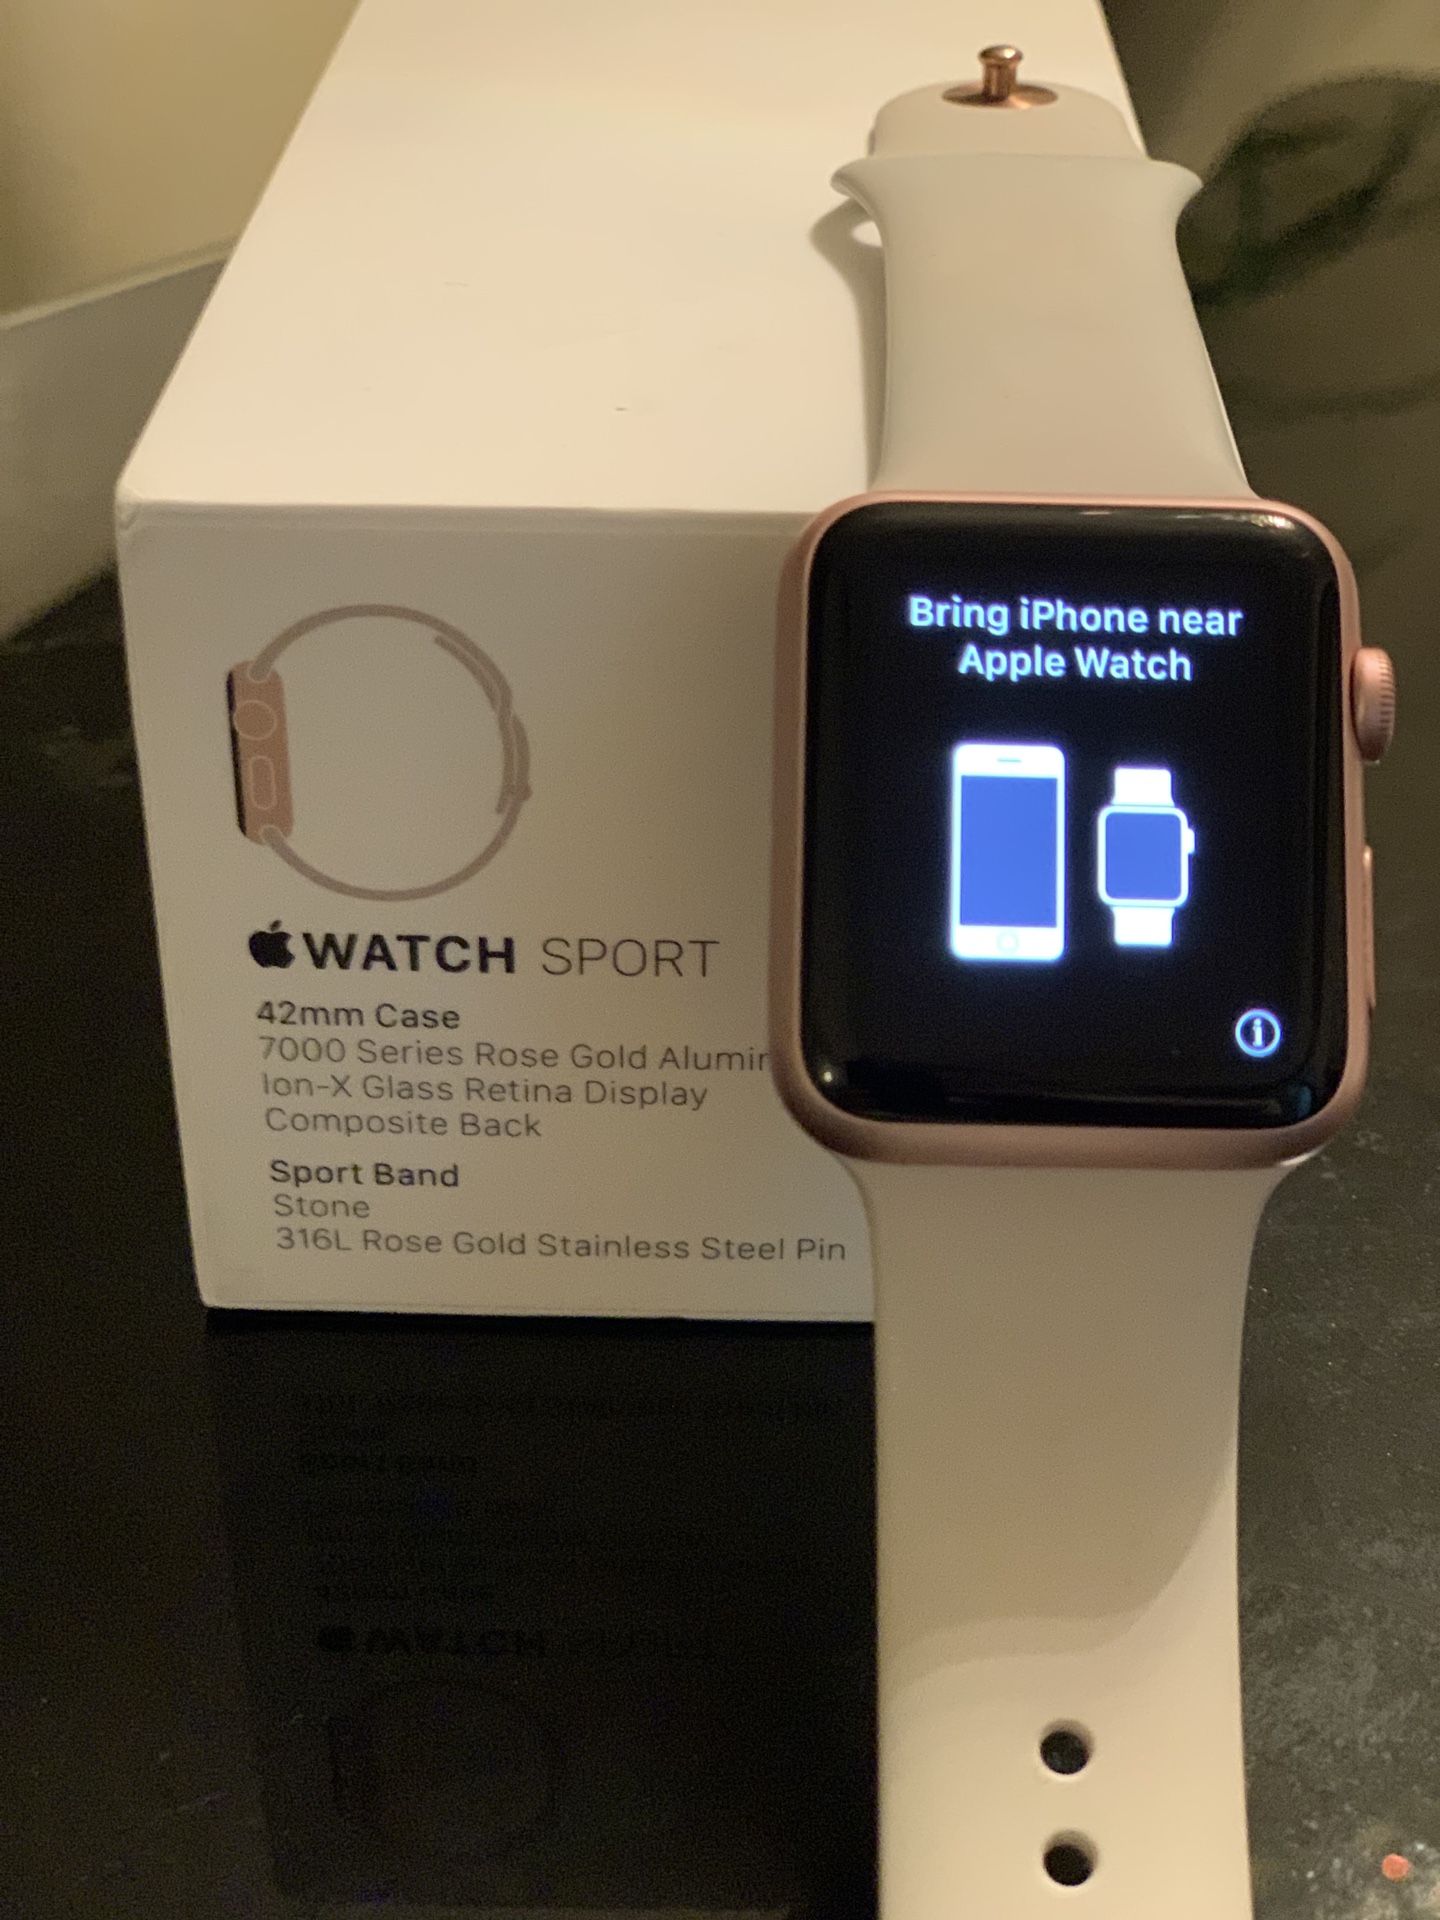 Rose Gold Apple Watch 42mm series 1 w/ AirPods Pro